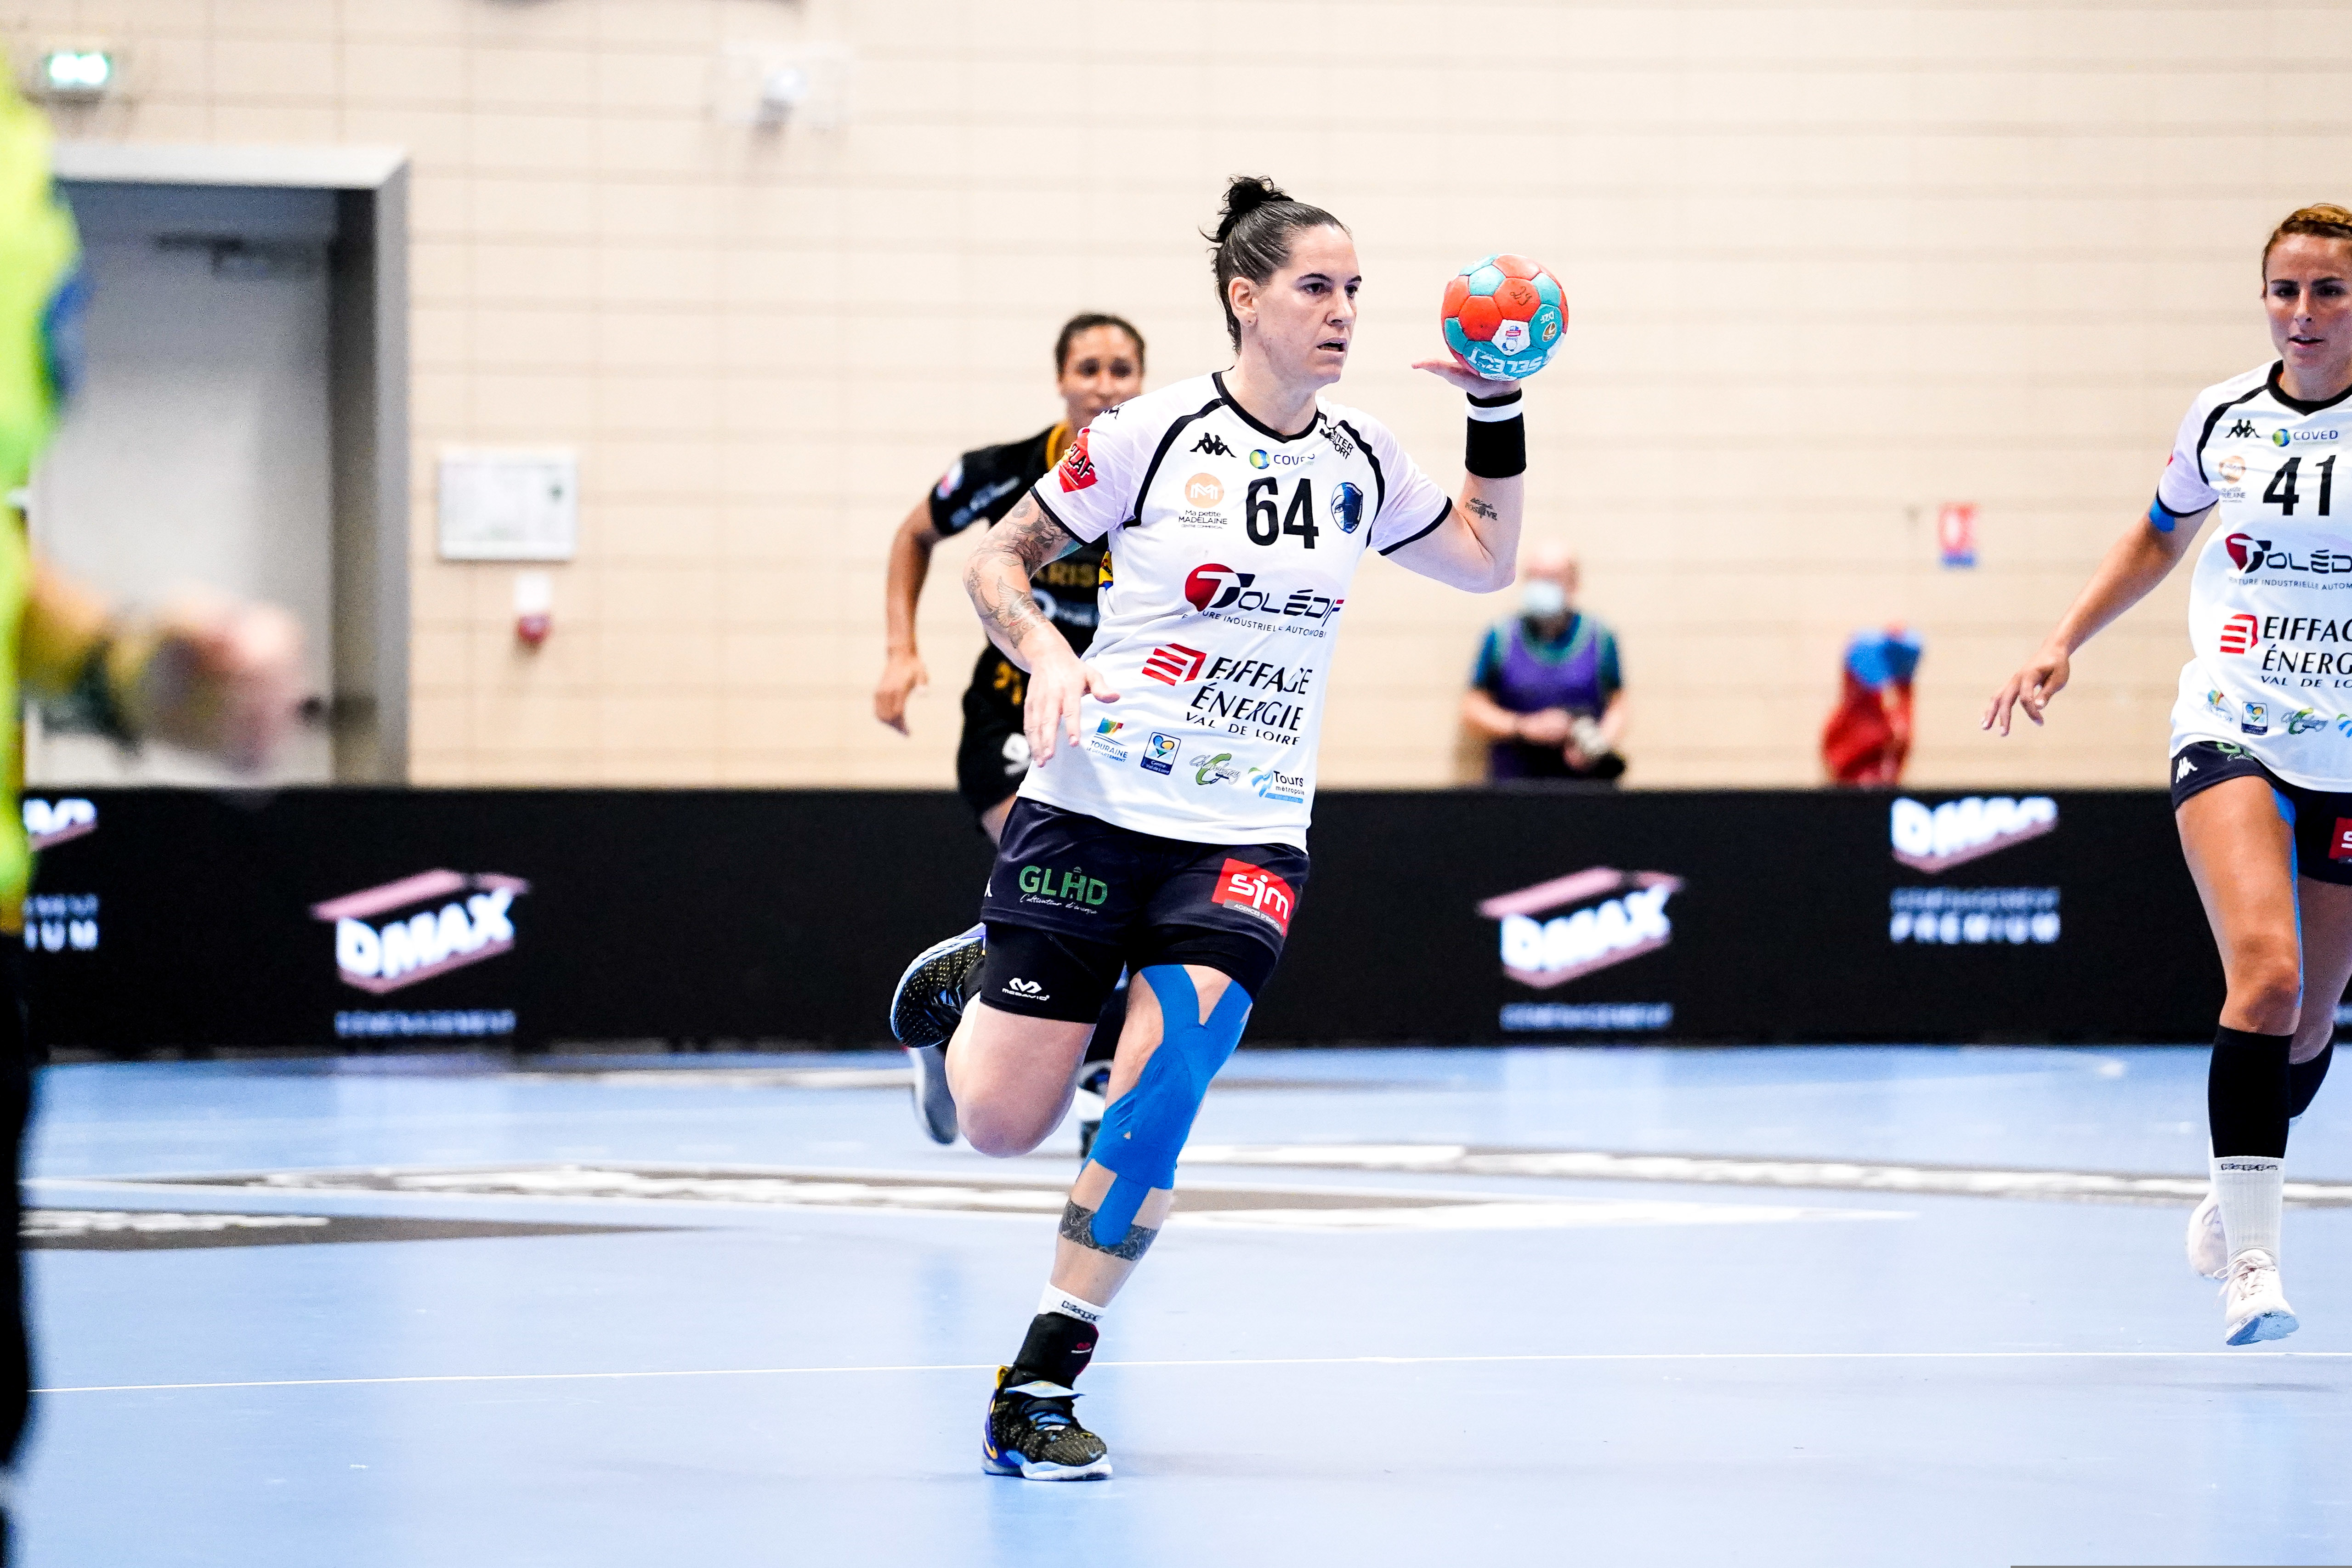 Alexandra LACRABERE of Chambray Touraine Handball (CTHB) during the Ligue Butaguaz Energie match between Paris 92 and Chambray at Palais des Sports on September 8, 2021 in Paris, France. (Photo by Hugo Pfeiffer/Icon Sport)